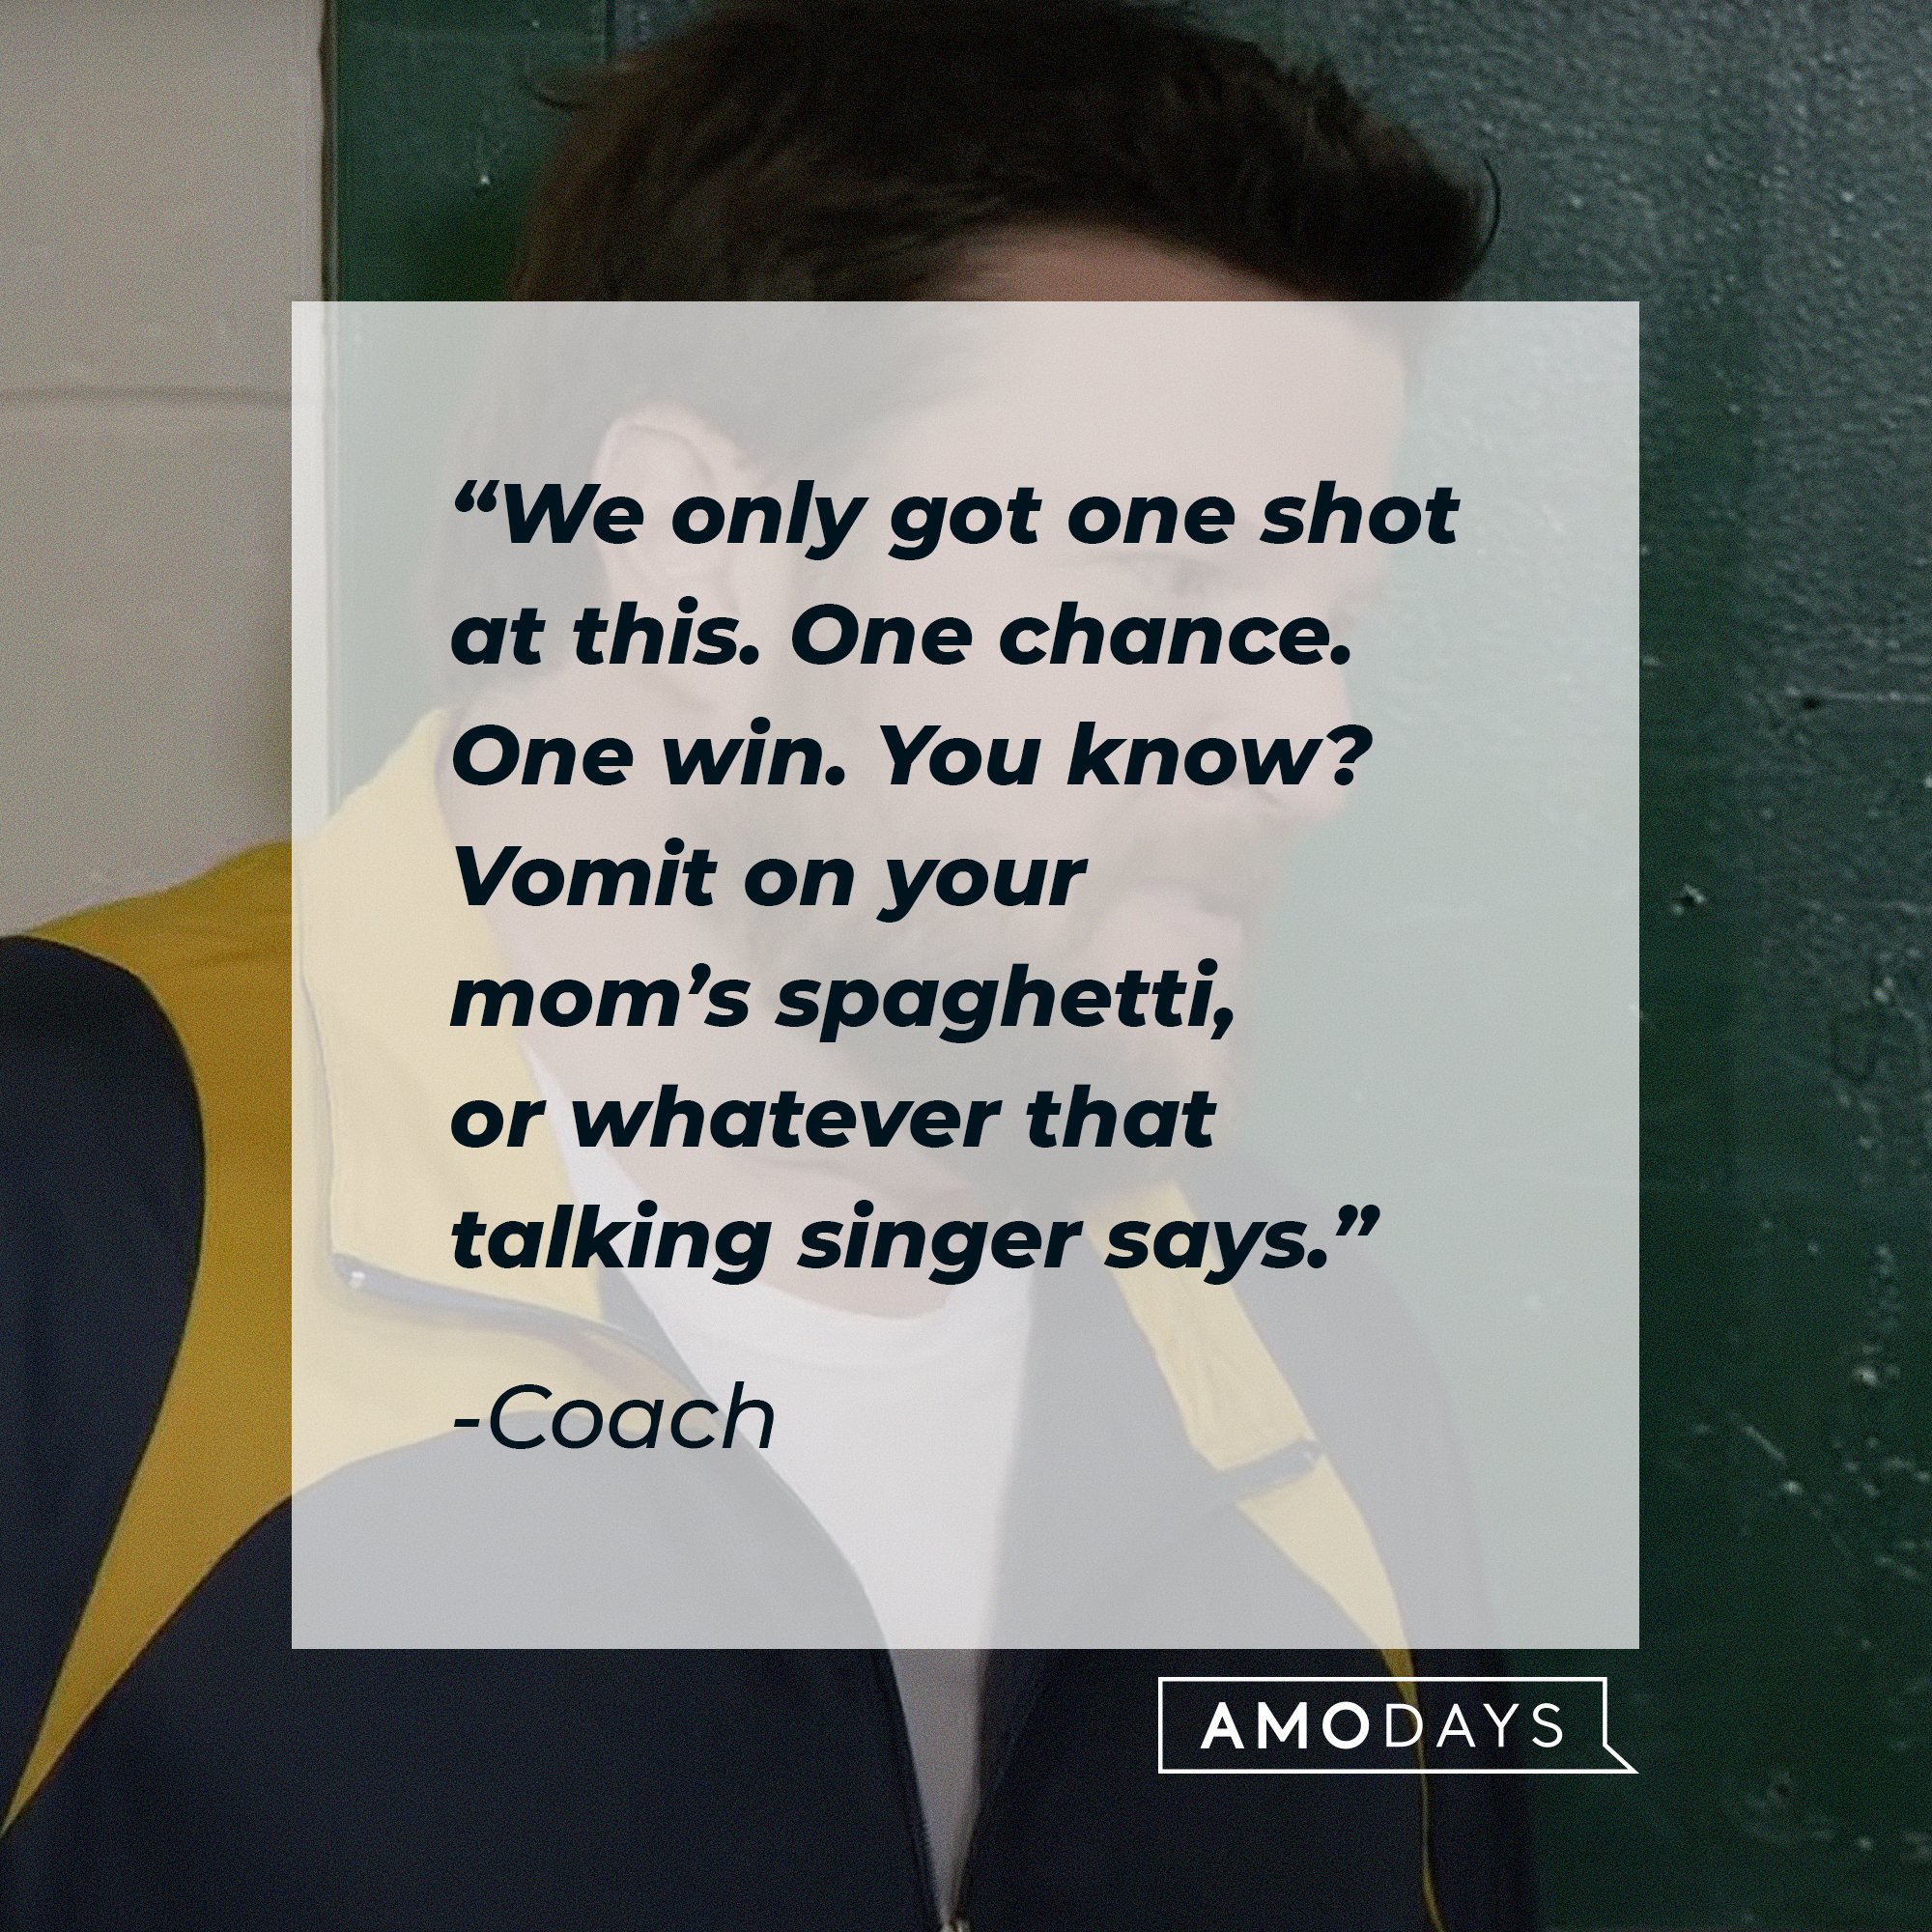 Coaches’ quote: “We only got one shot at this. One chance. One win. You know? Vomit on your mom’s spaghetti, or whatever that talking singer says.”  | Image: AmoDays